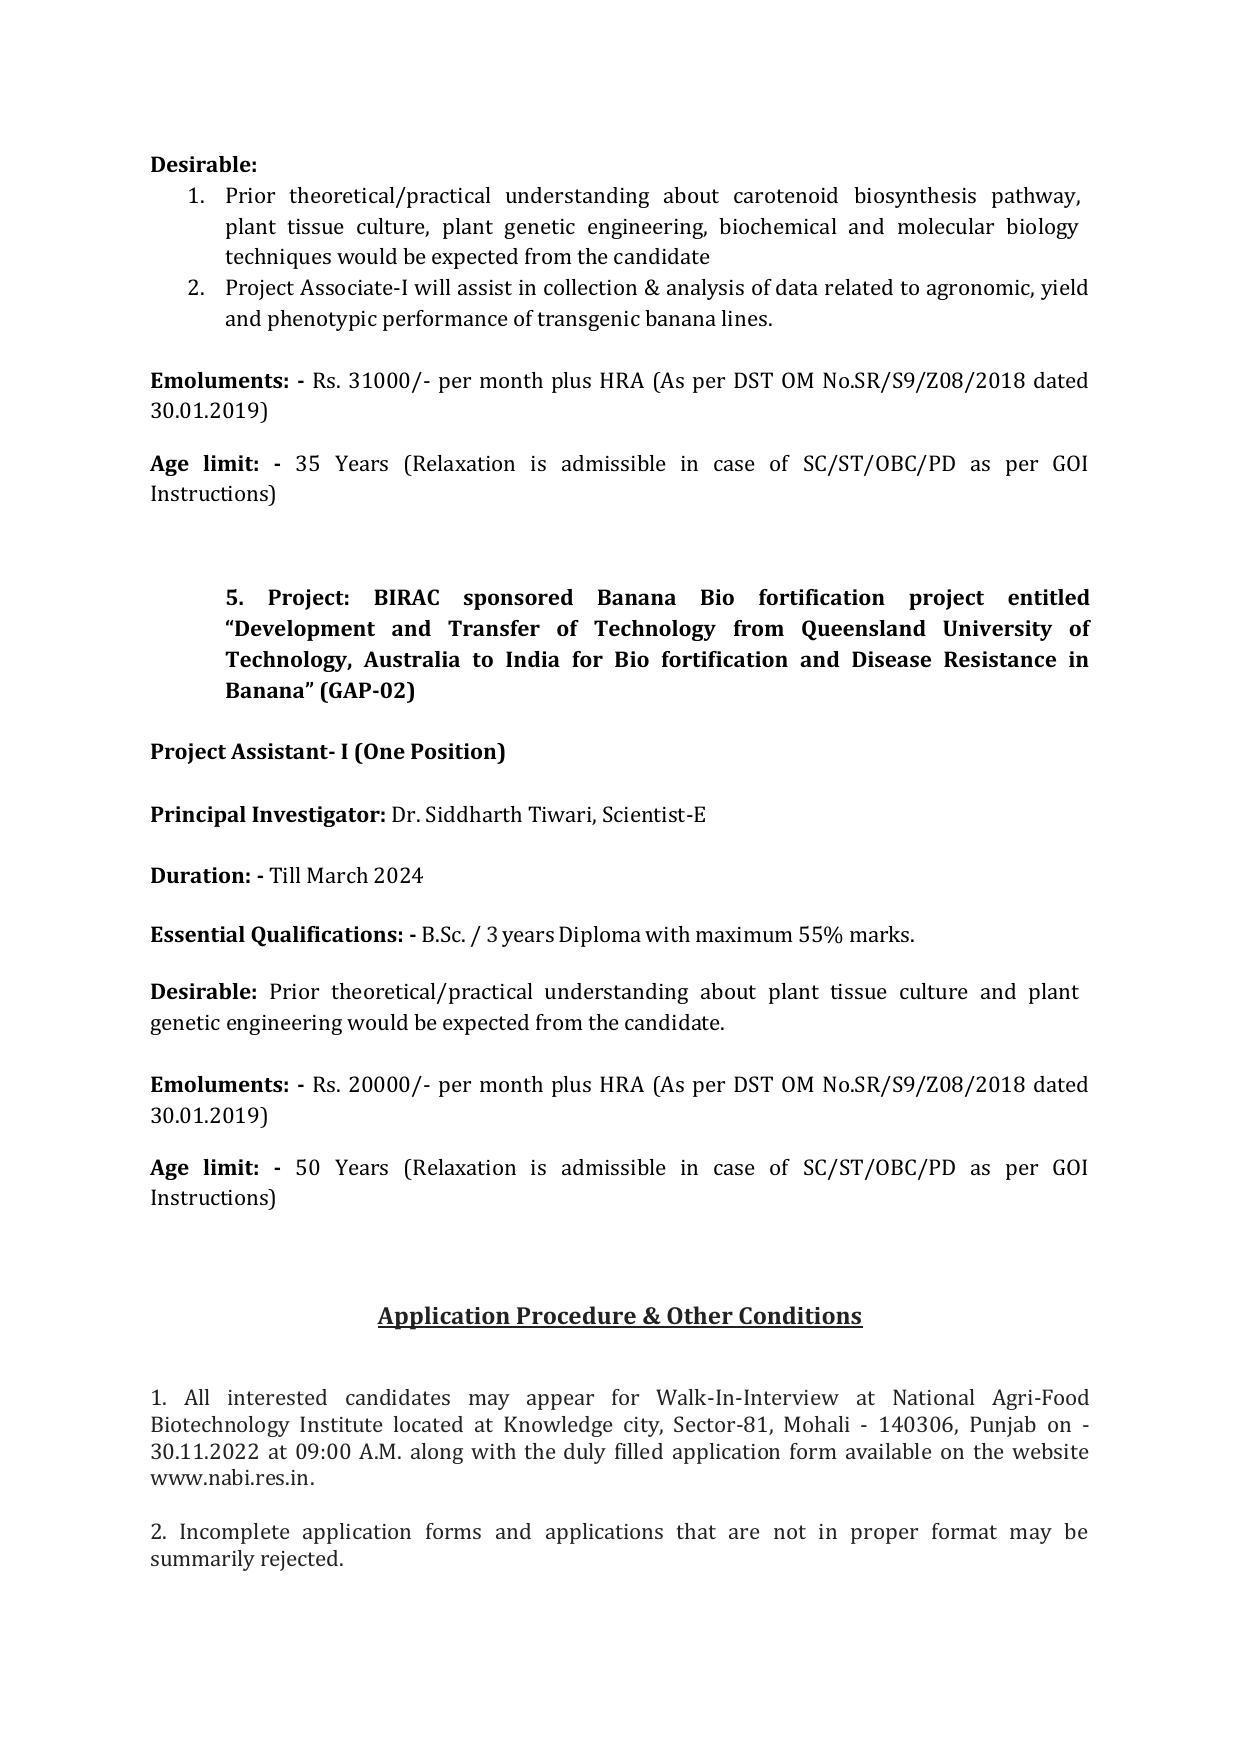 NABI Invites Application for Research Associate-III, Project Scientist-I, More Vacancies Recruitment 2022 - Page 5